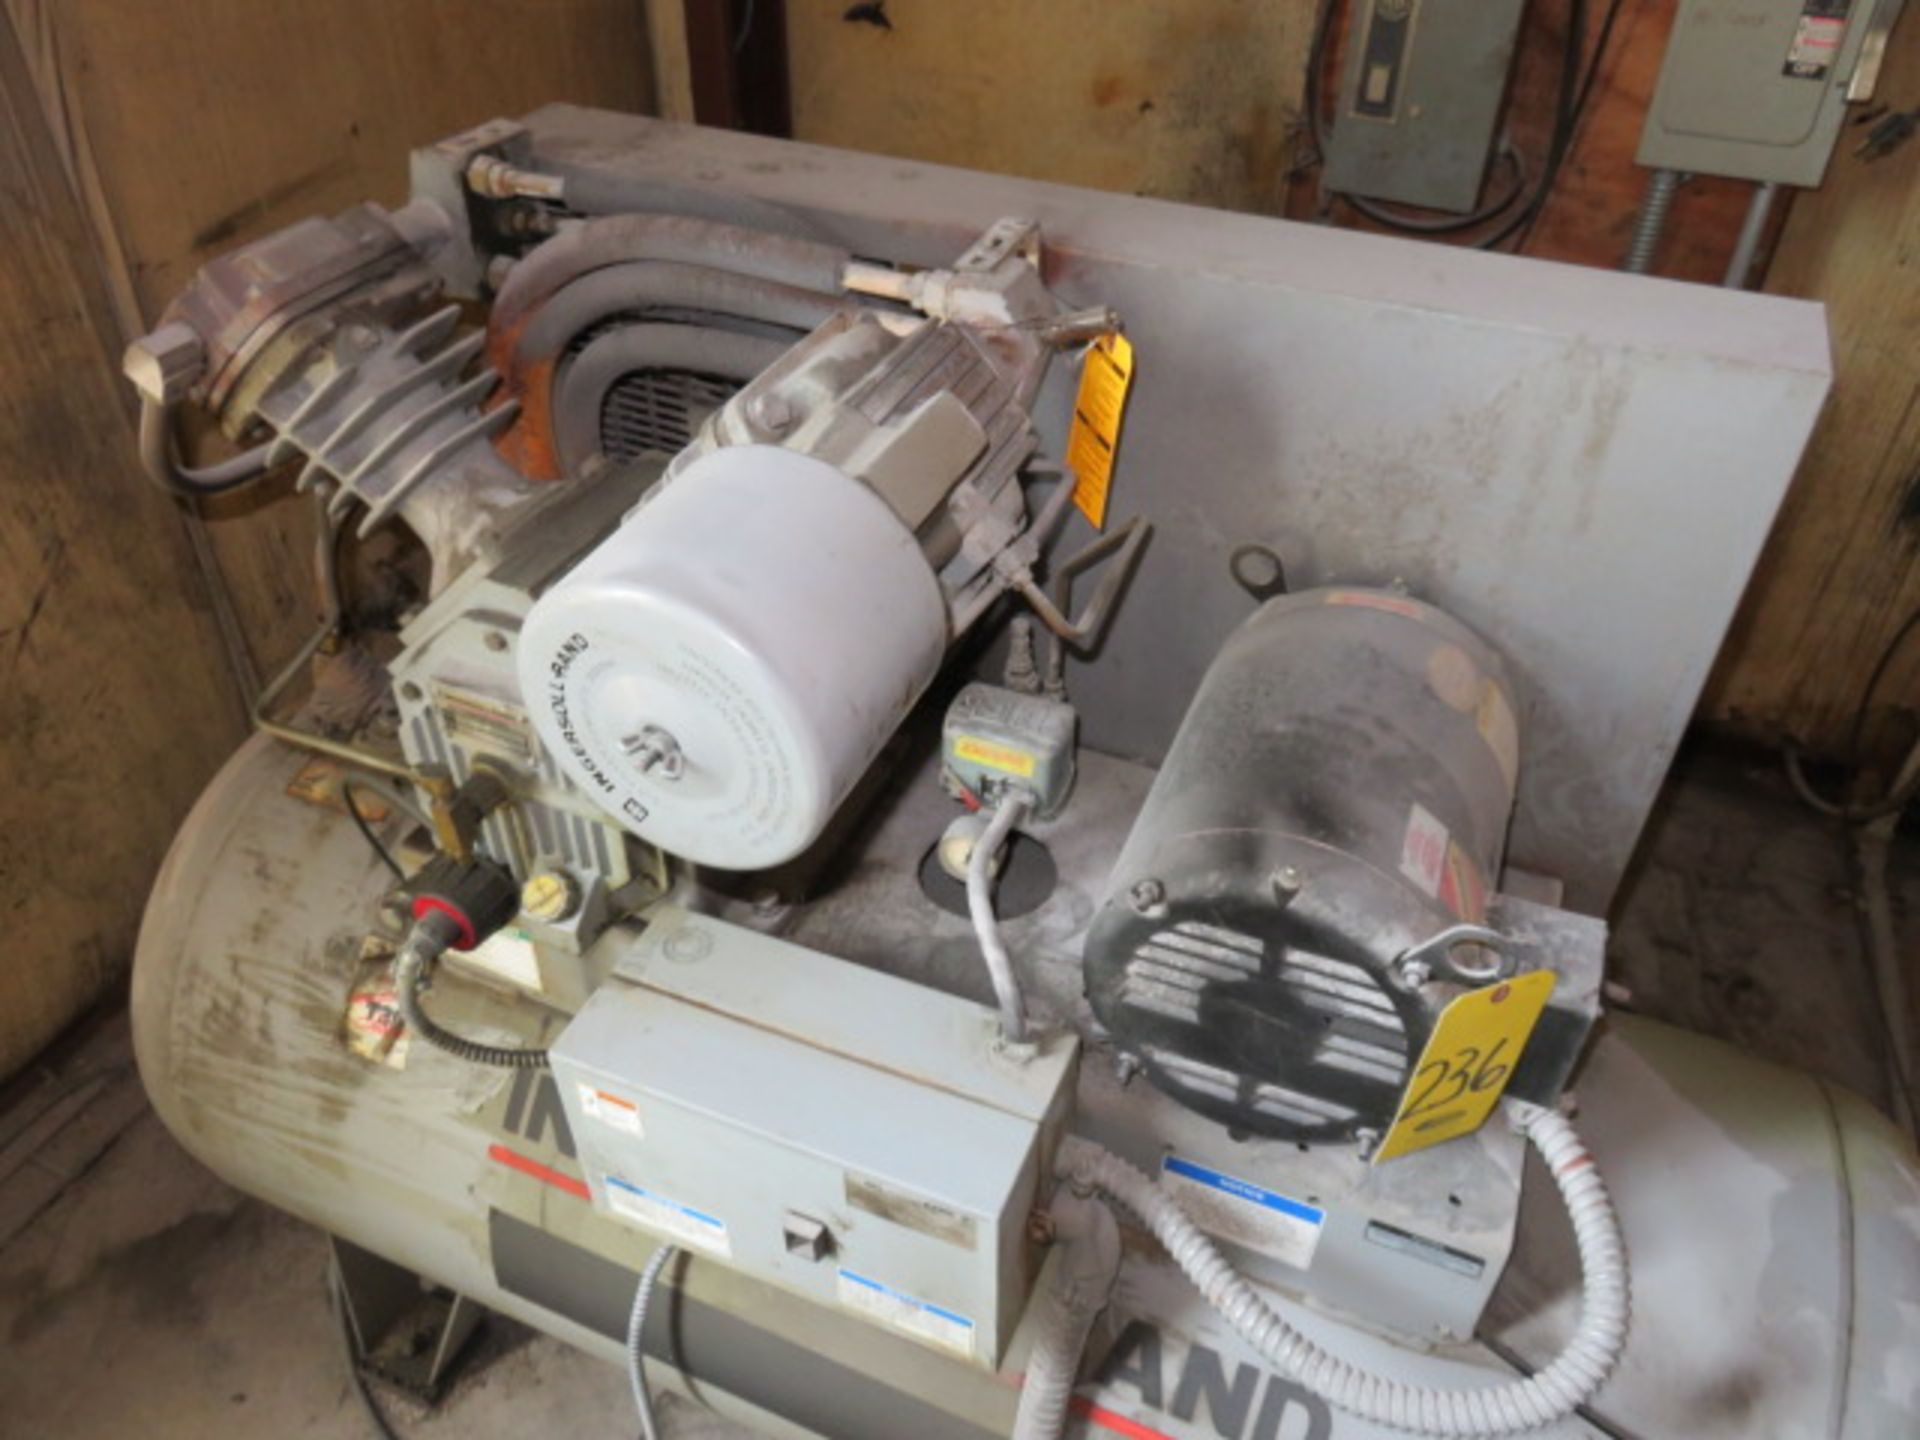 INGERSOLL RAND 2540E10 RECIPROCATING 10 HP AIR COMPRESSOR, (LOADING FEE - $200) - Image 2 of 2